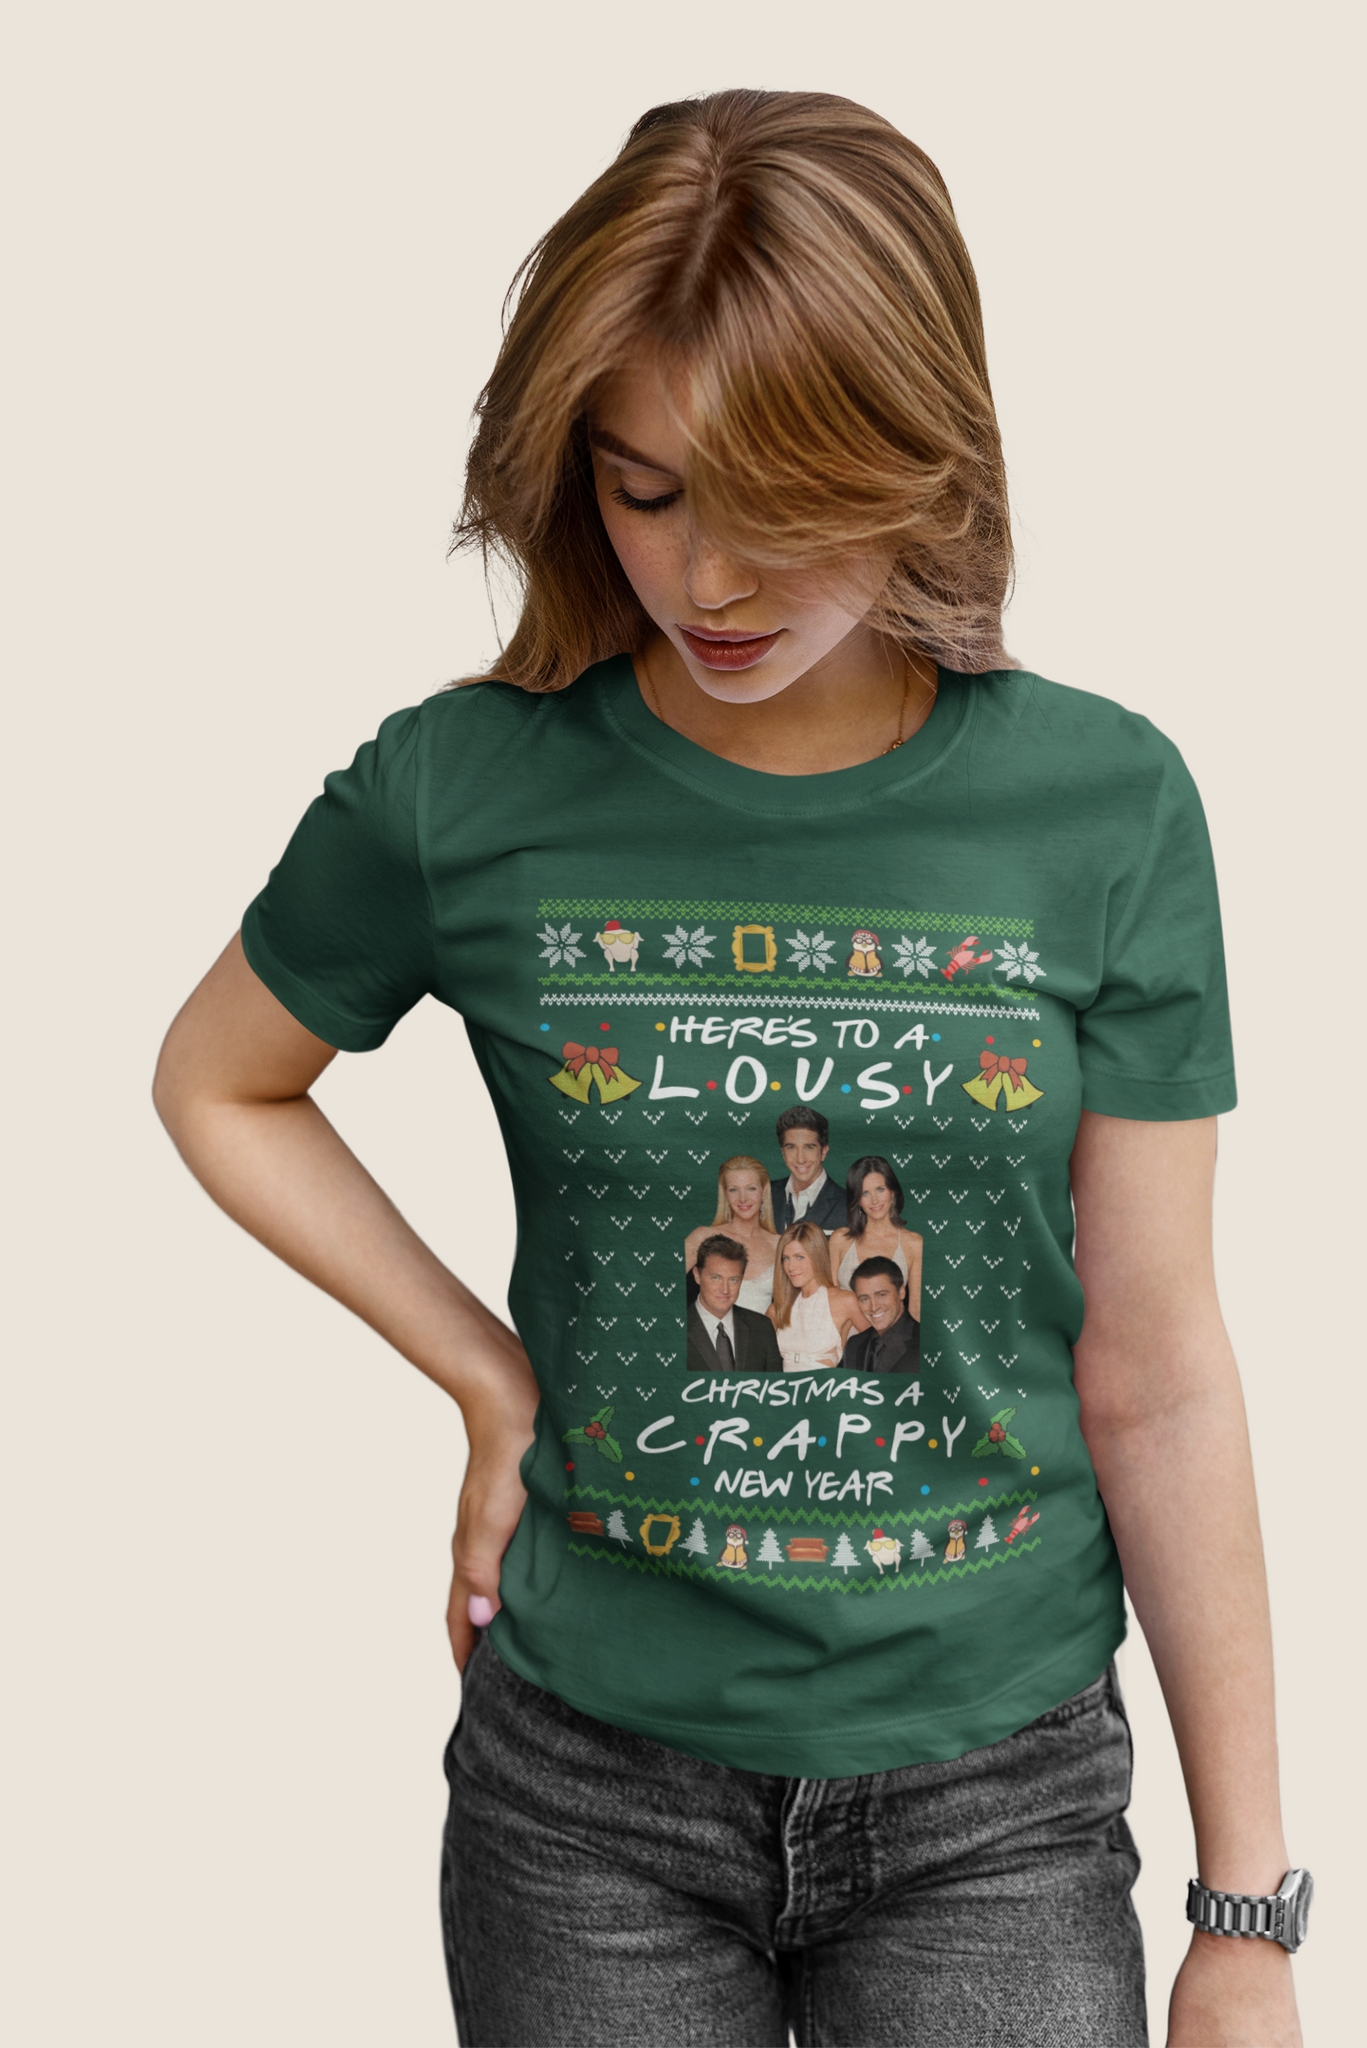 Friends TV Show Ugly Sweater Shirt, Friends Characters T Shirt, Heres To A Lousy Christmas A Crappy New Year Tshirt, Christmas Gifts